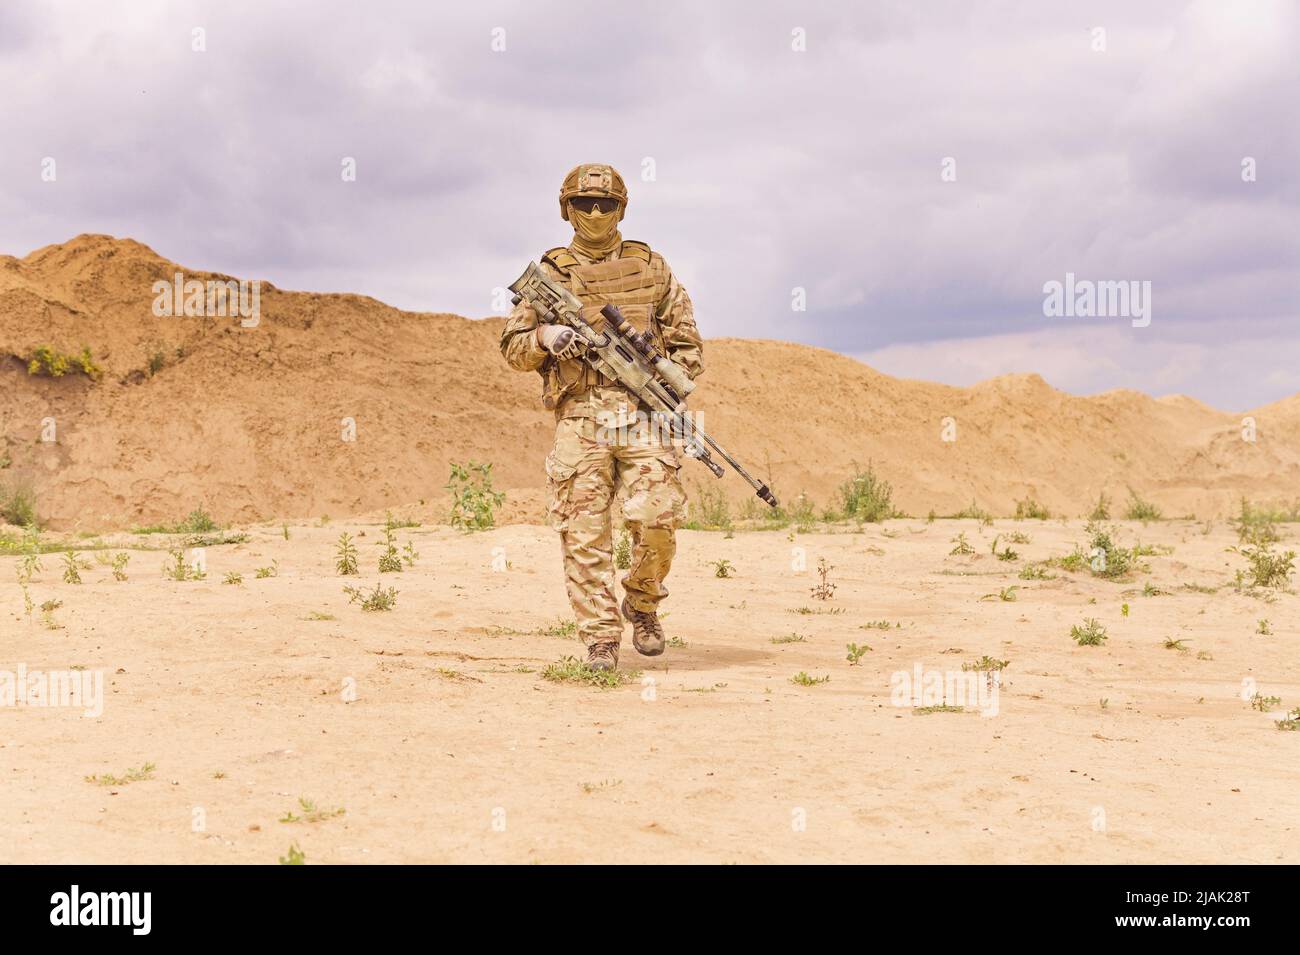 Fully equipped and armed special forces soldier in the desert. Stock Photo